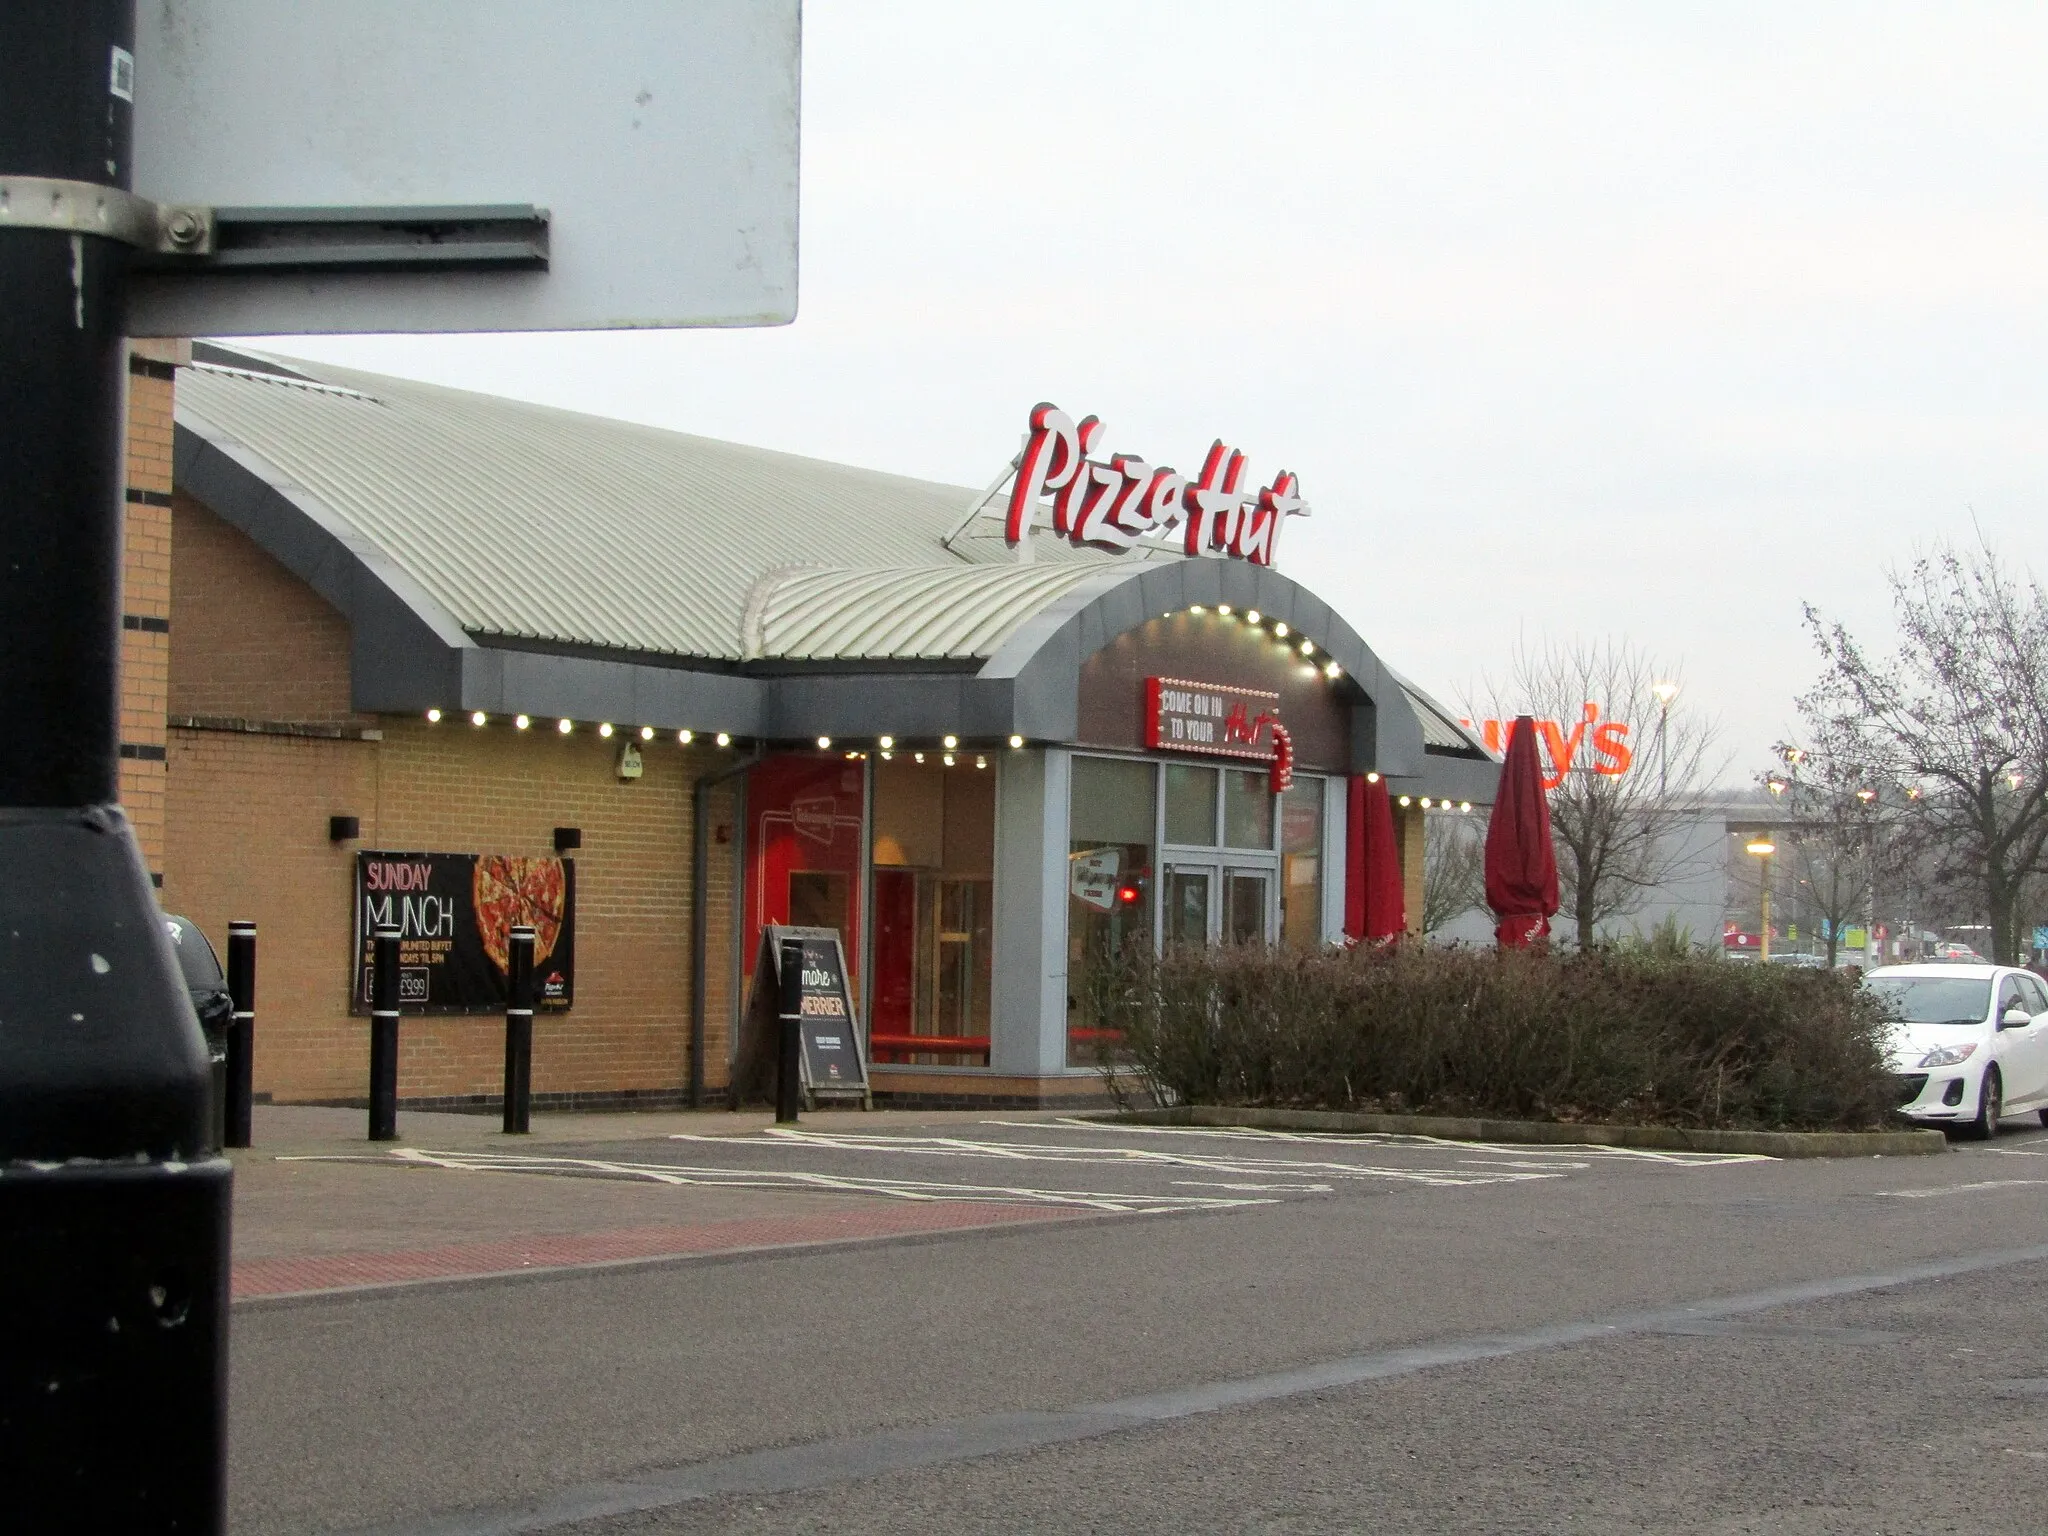 Photo showing: A Branch of Pizza Hut restaurants located on Longwater retail park which is in the neighbourhood of Costessey east of the city of Norwich, Norfolk, England.